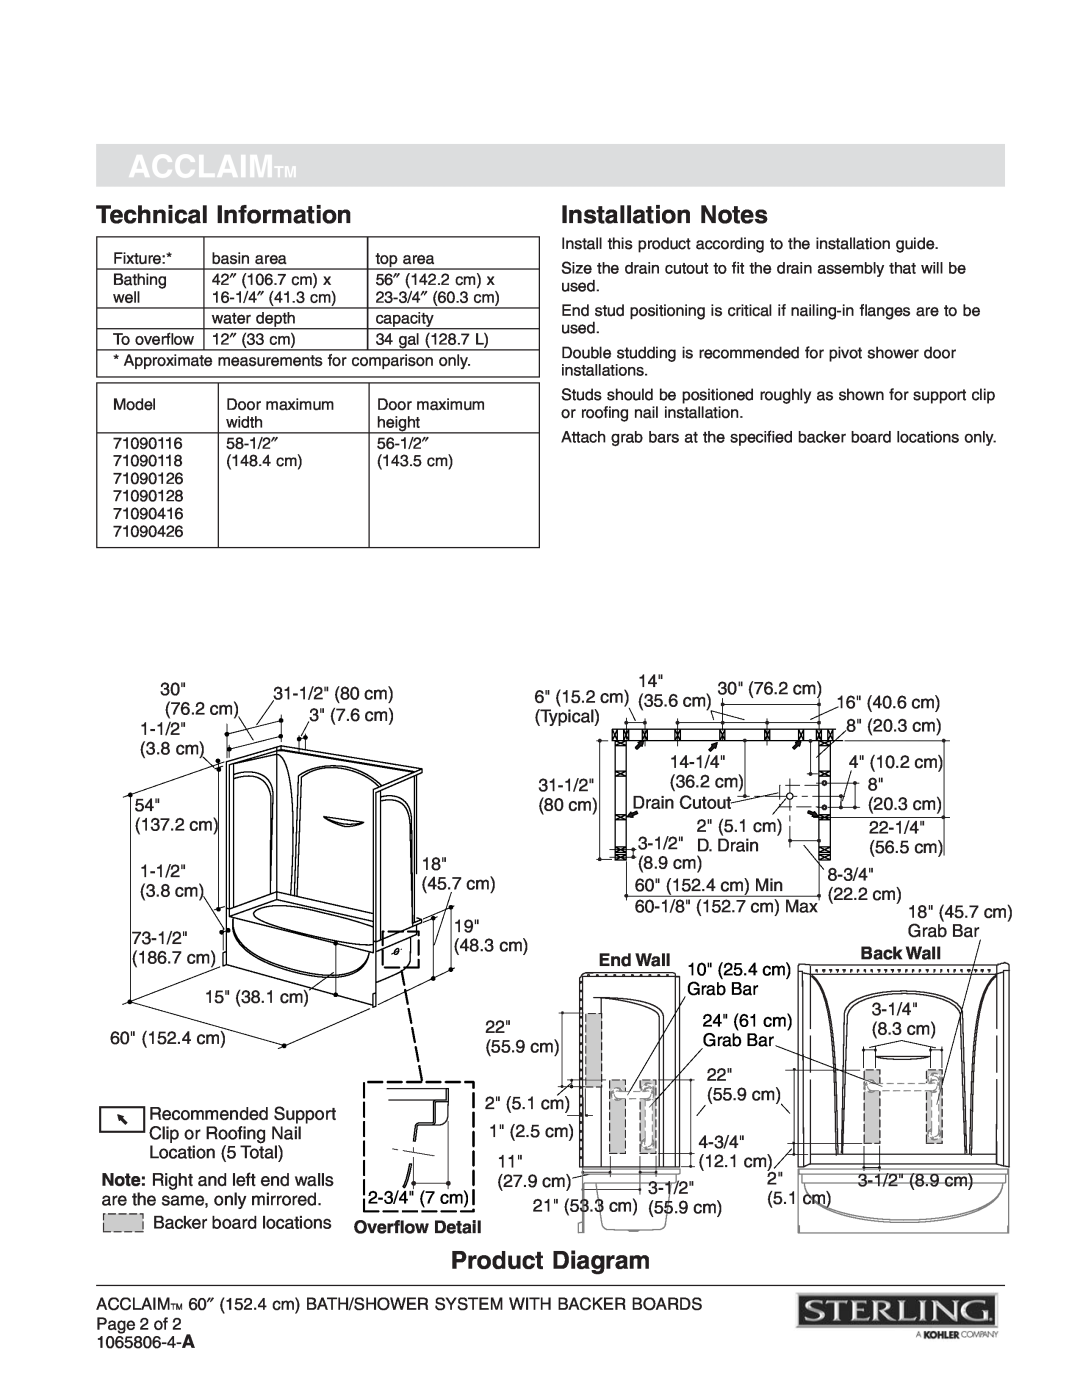 Sterling Plumbing 71090116 Technical Information, Installation Notes, Product Diagram, Acclaimtm, Back Wall, End Wall 